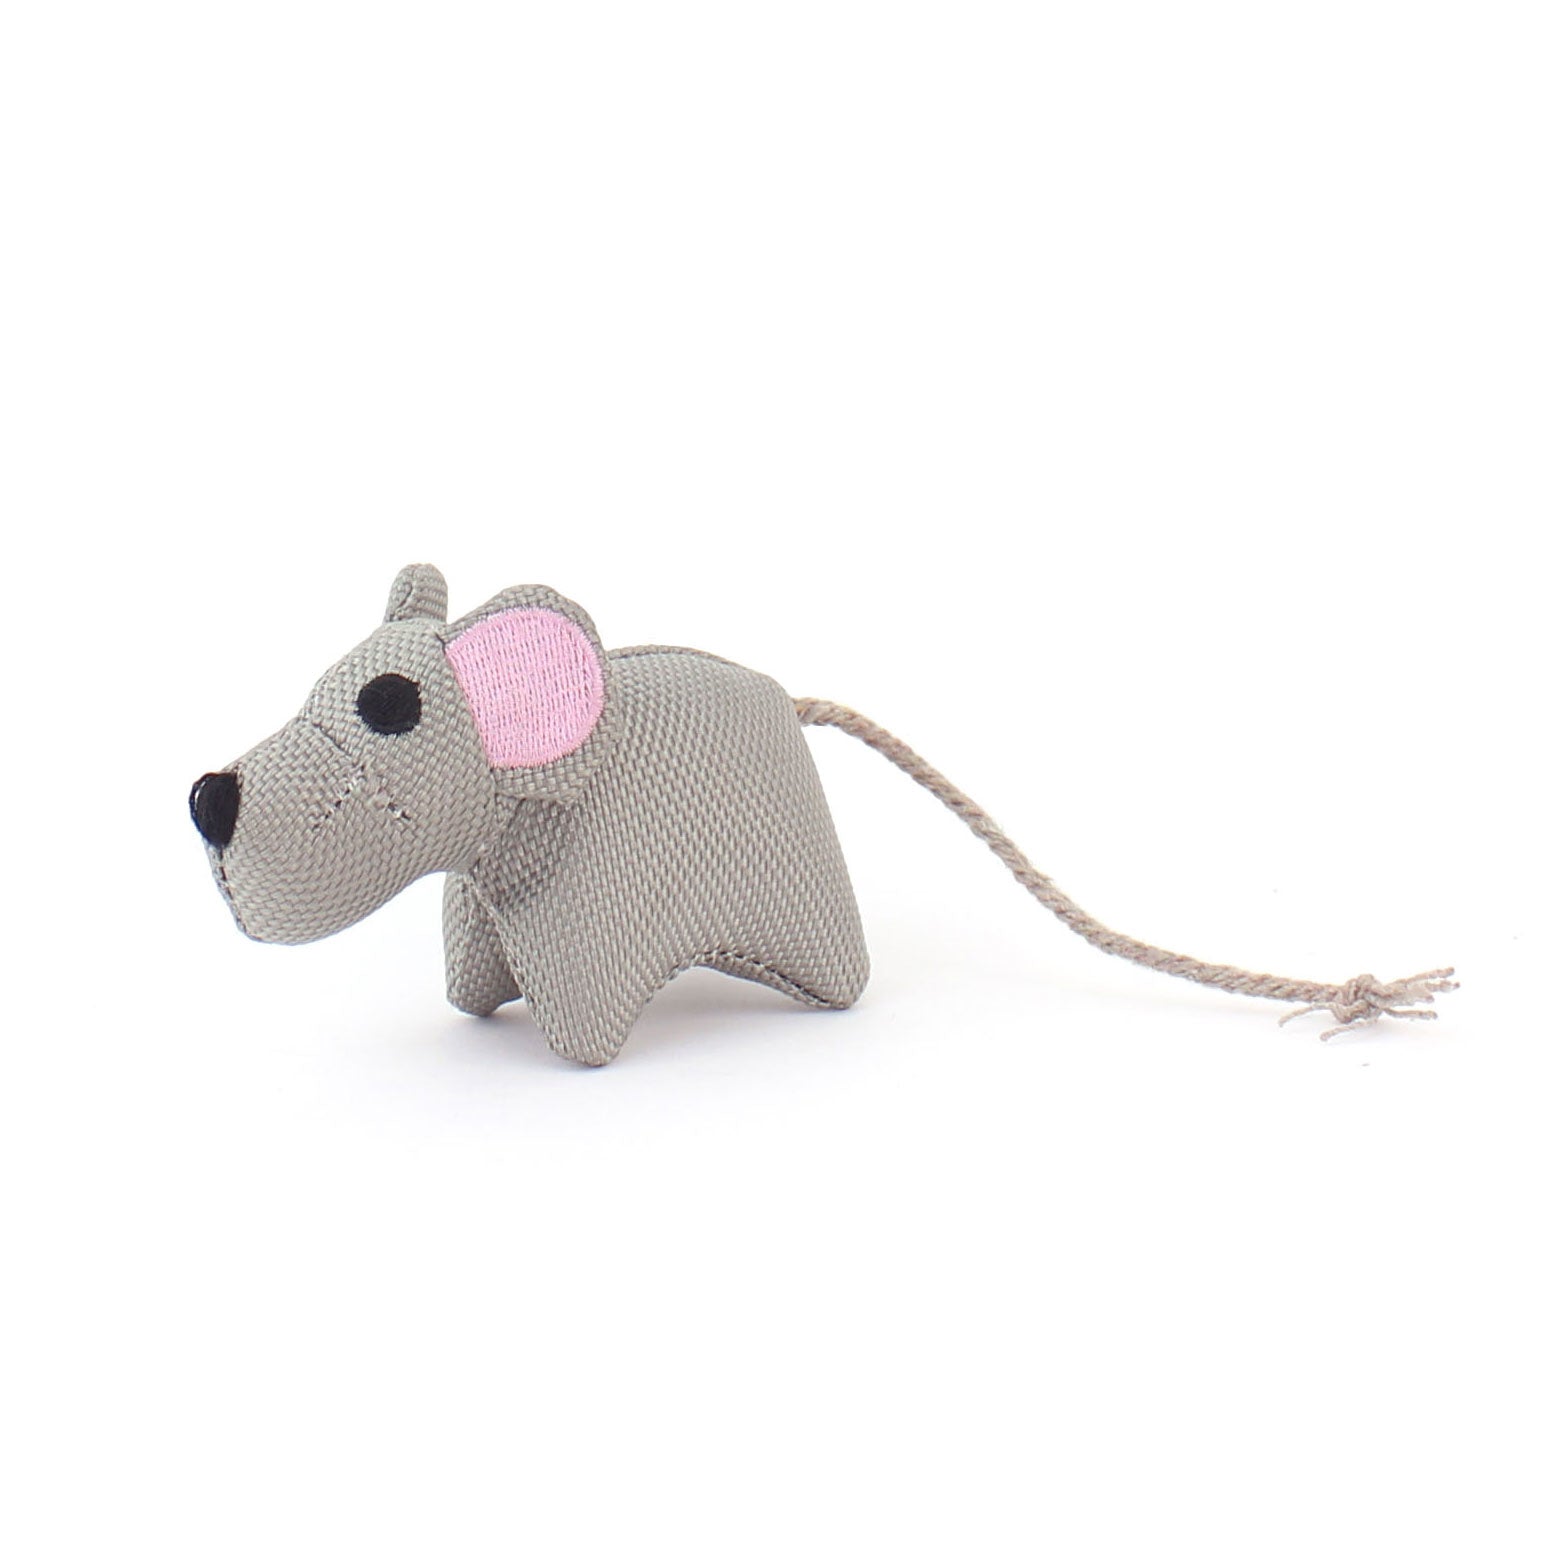 Beco Plush Toy - Millie the Mouse - Beco Pets